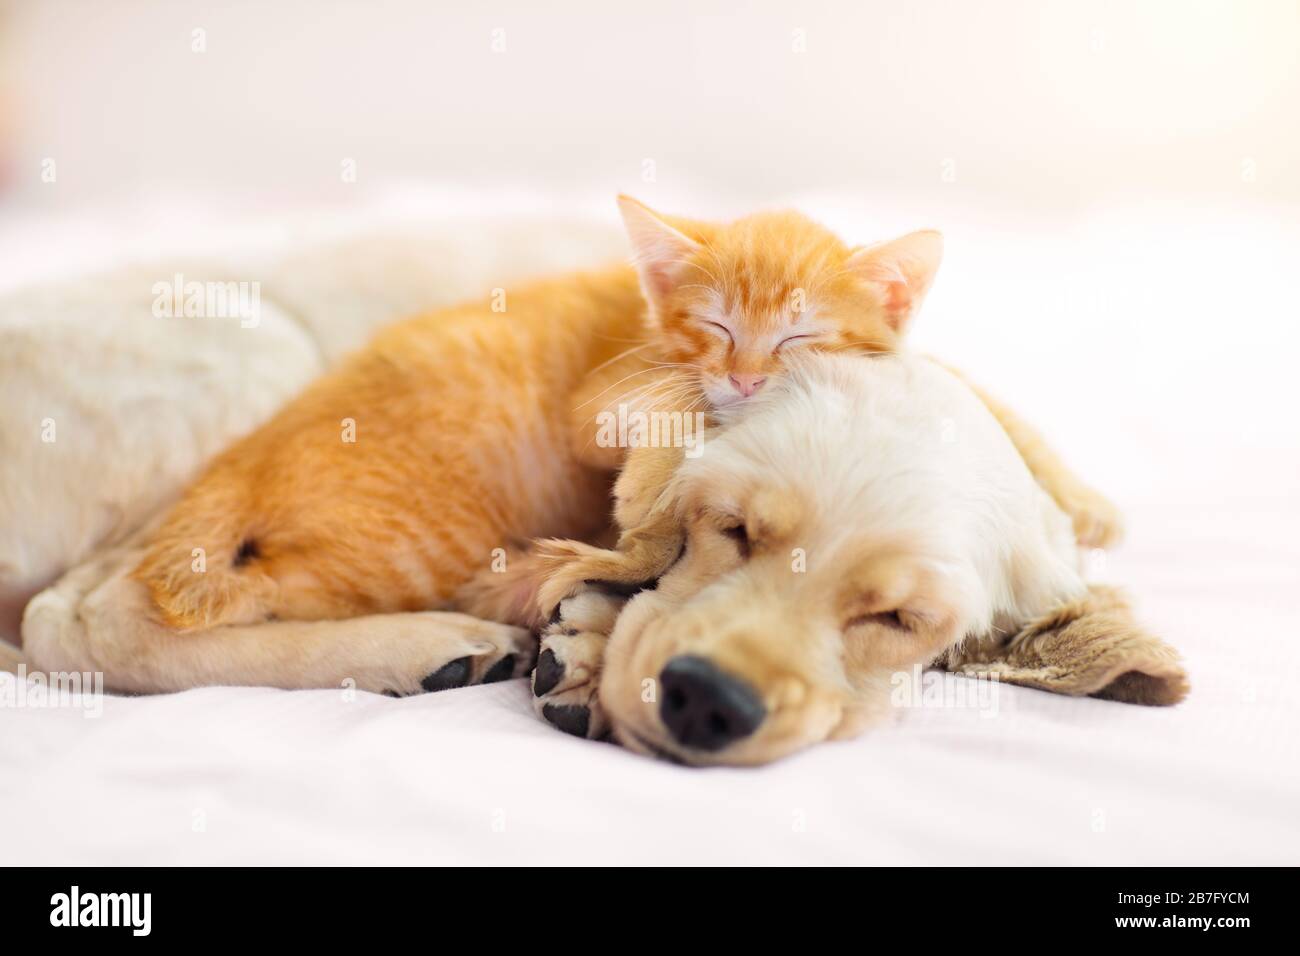 Cat and dog sleeping together. Kitten and puppy taking nap. Home pets. Animal care. Love and friendship. Domestic animals. Stock Photo